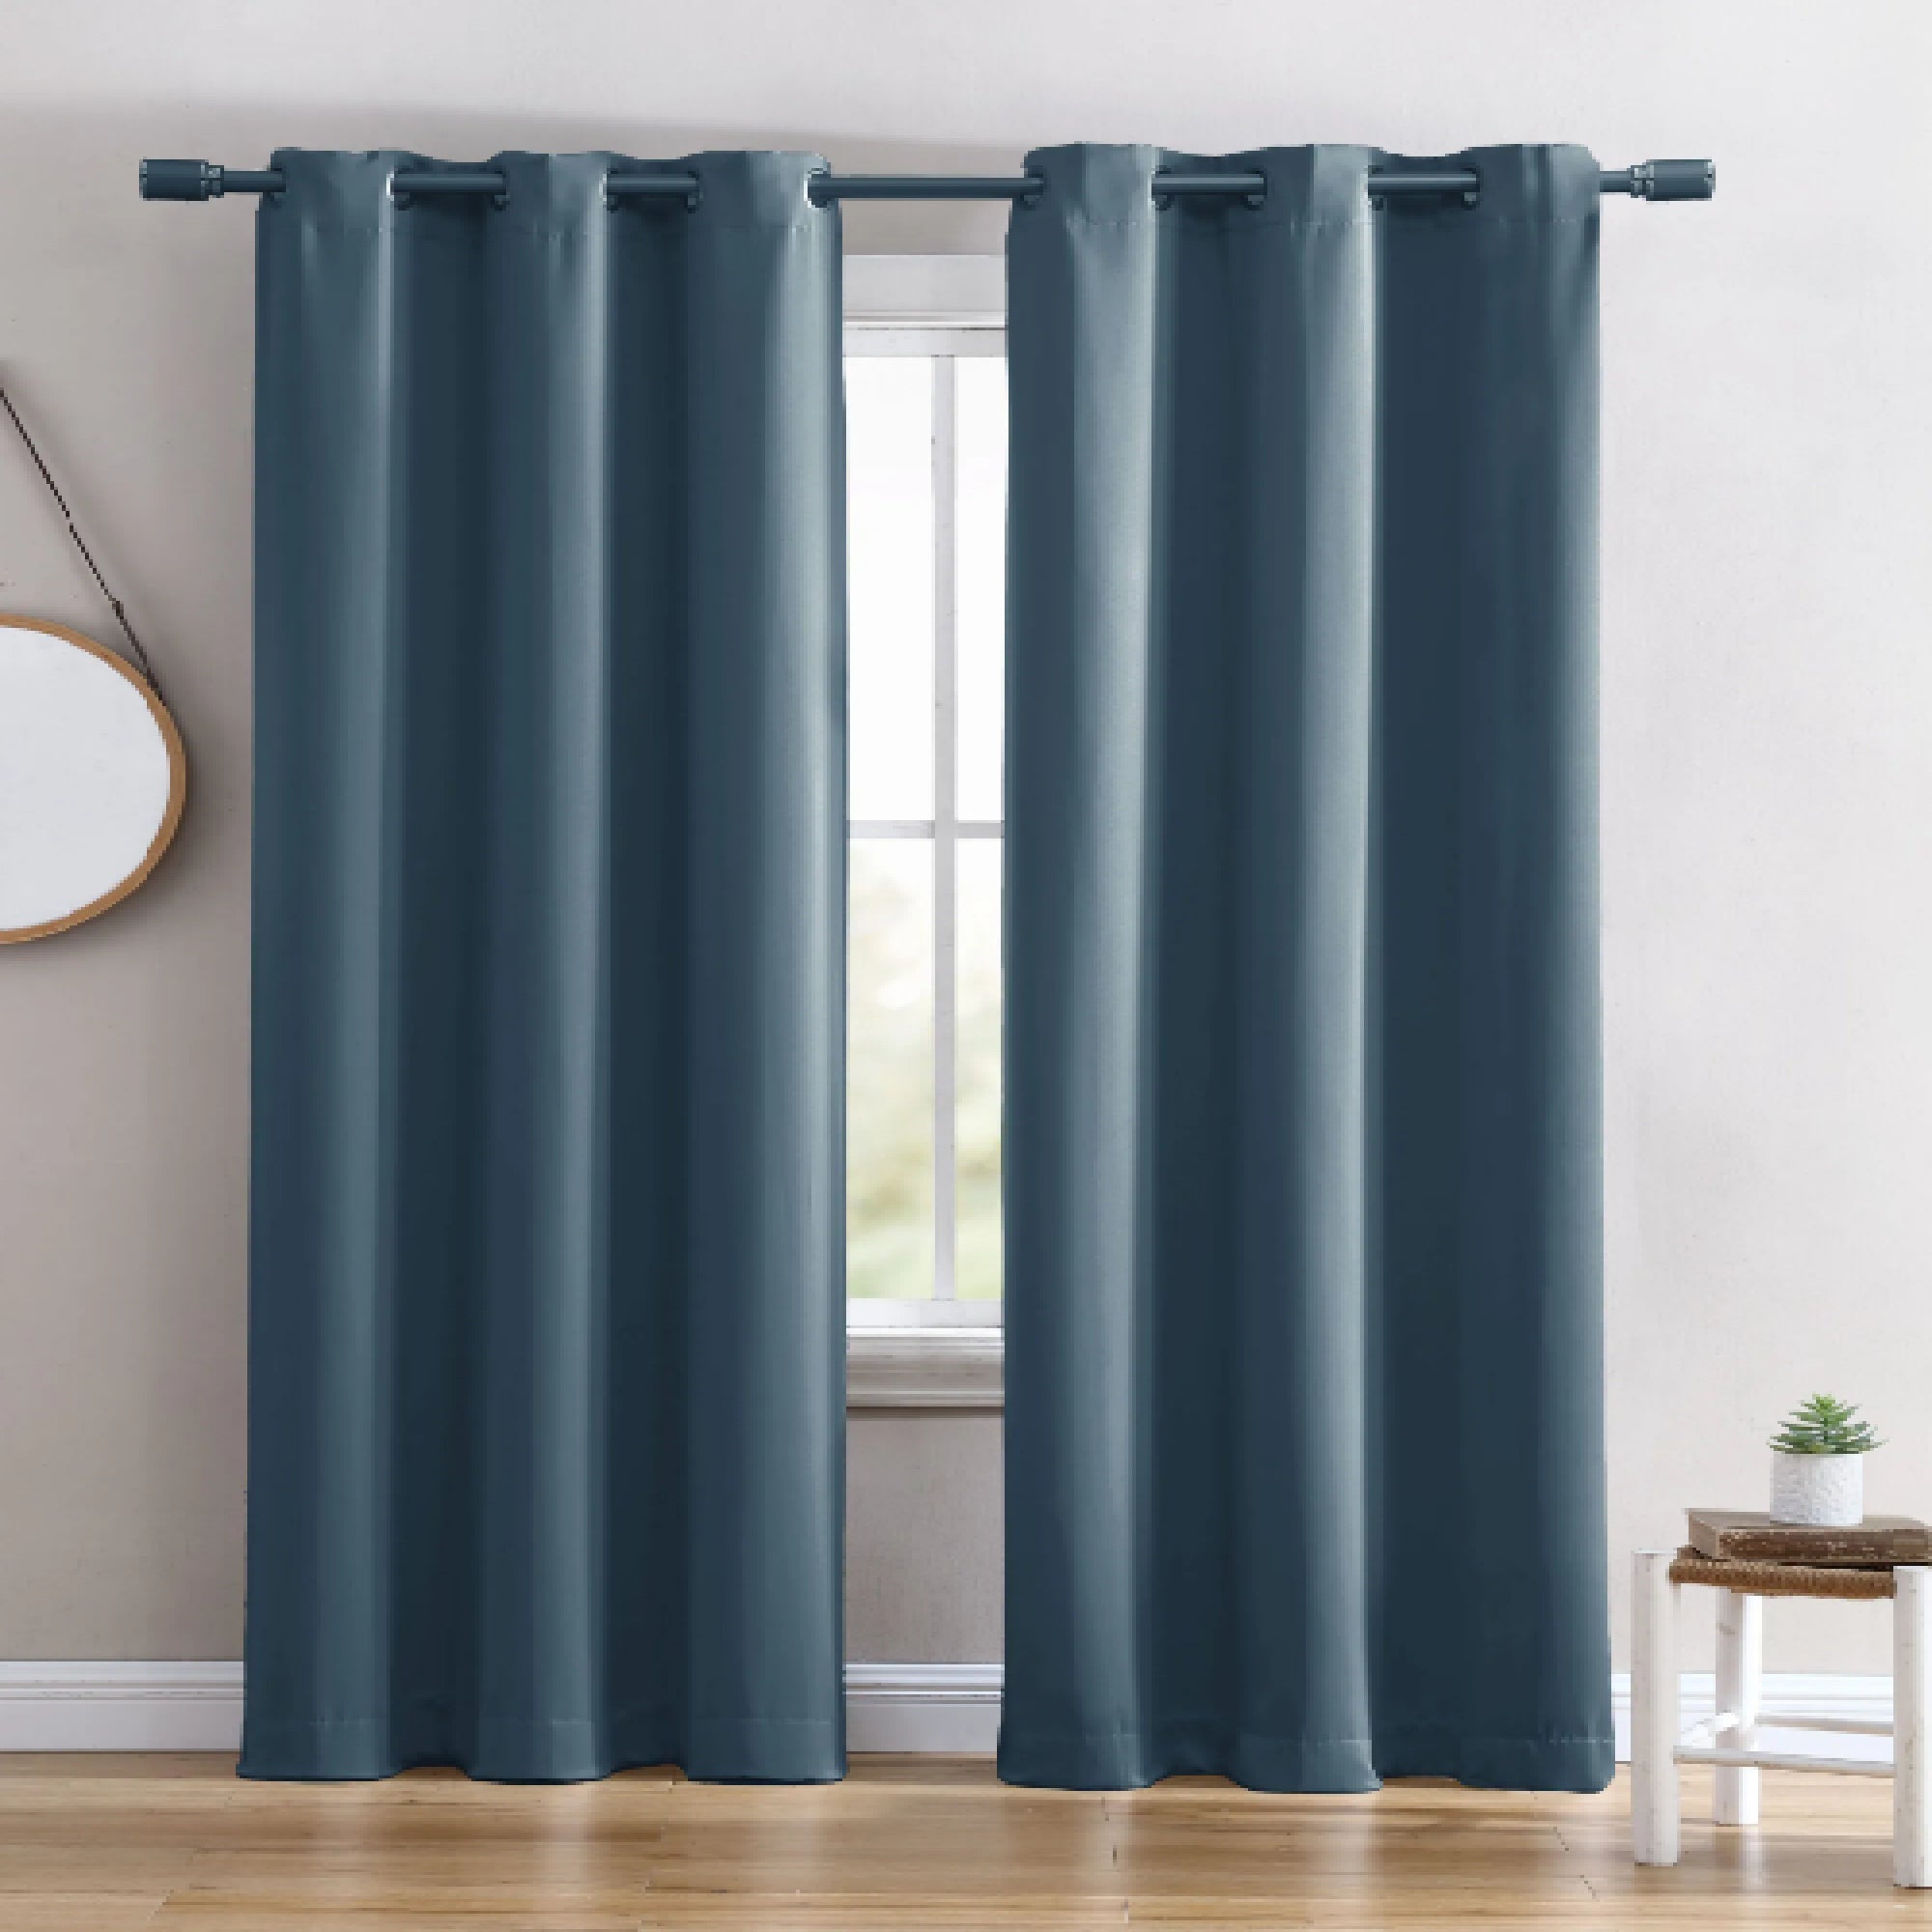 Ring Top Solid Blackout Thermal Grommet Single Curtain Panel Blue